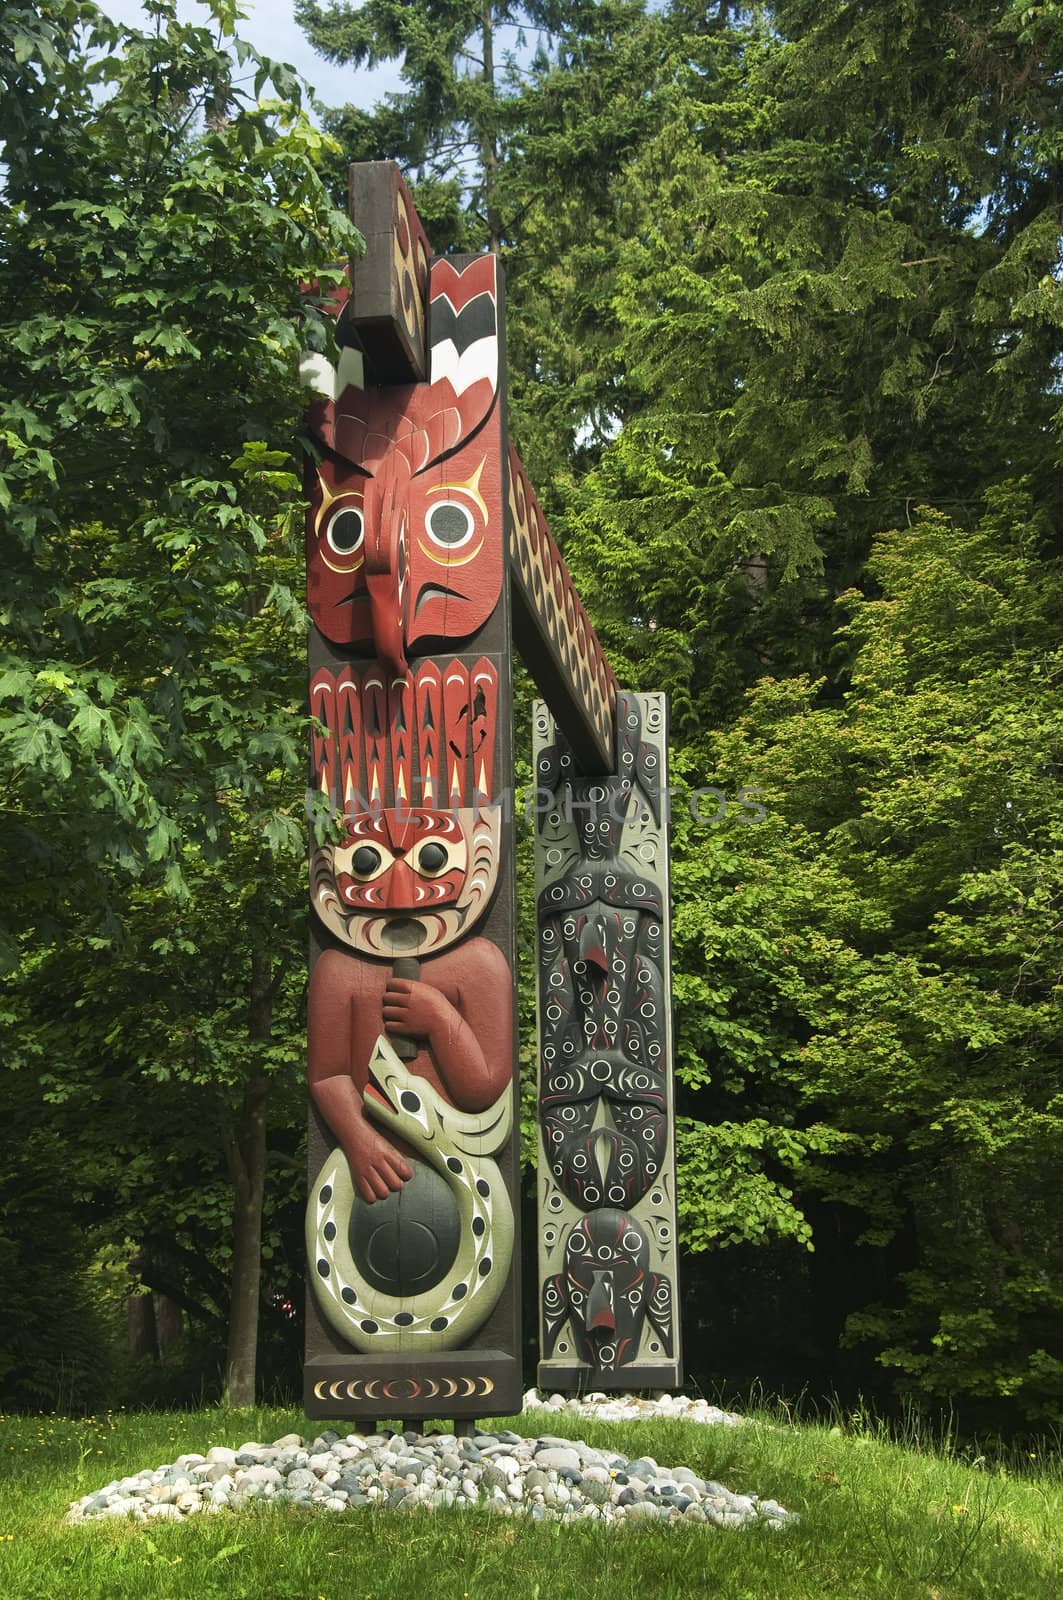 TOTEM PARK AT THE PROVINCIAL MUSEUM by irisphoto4